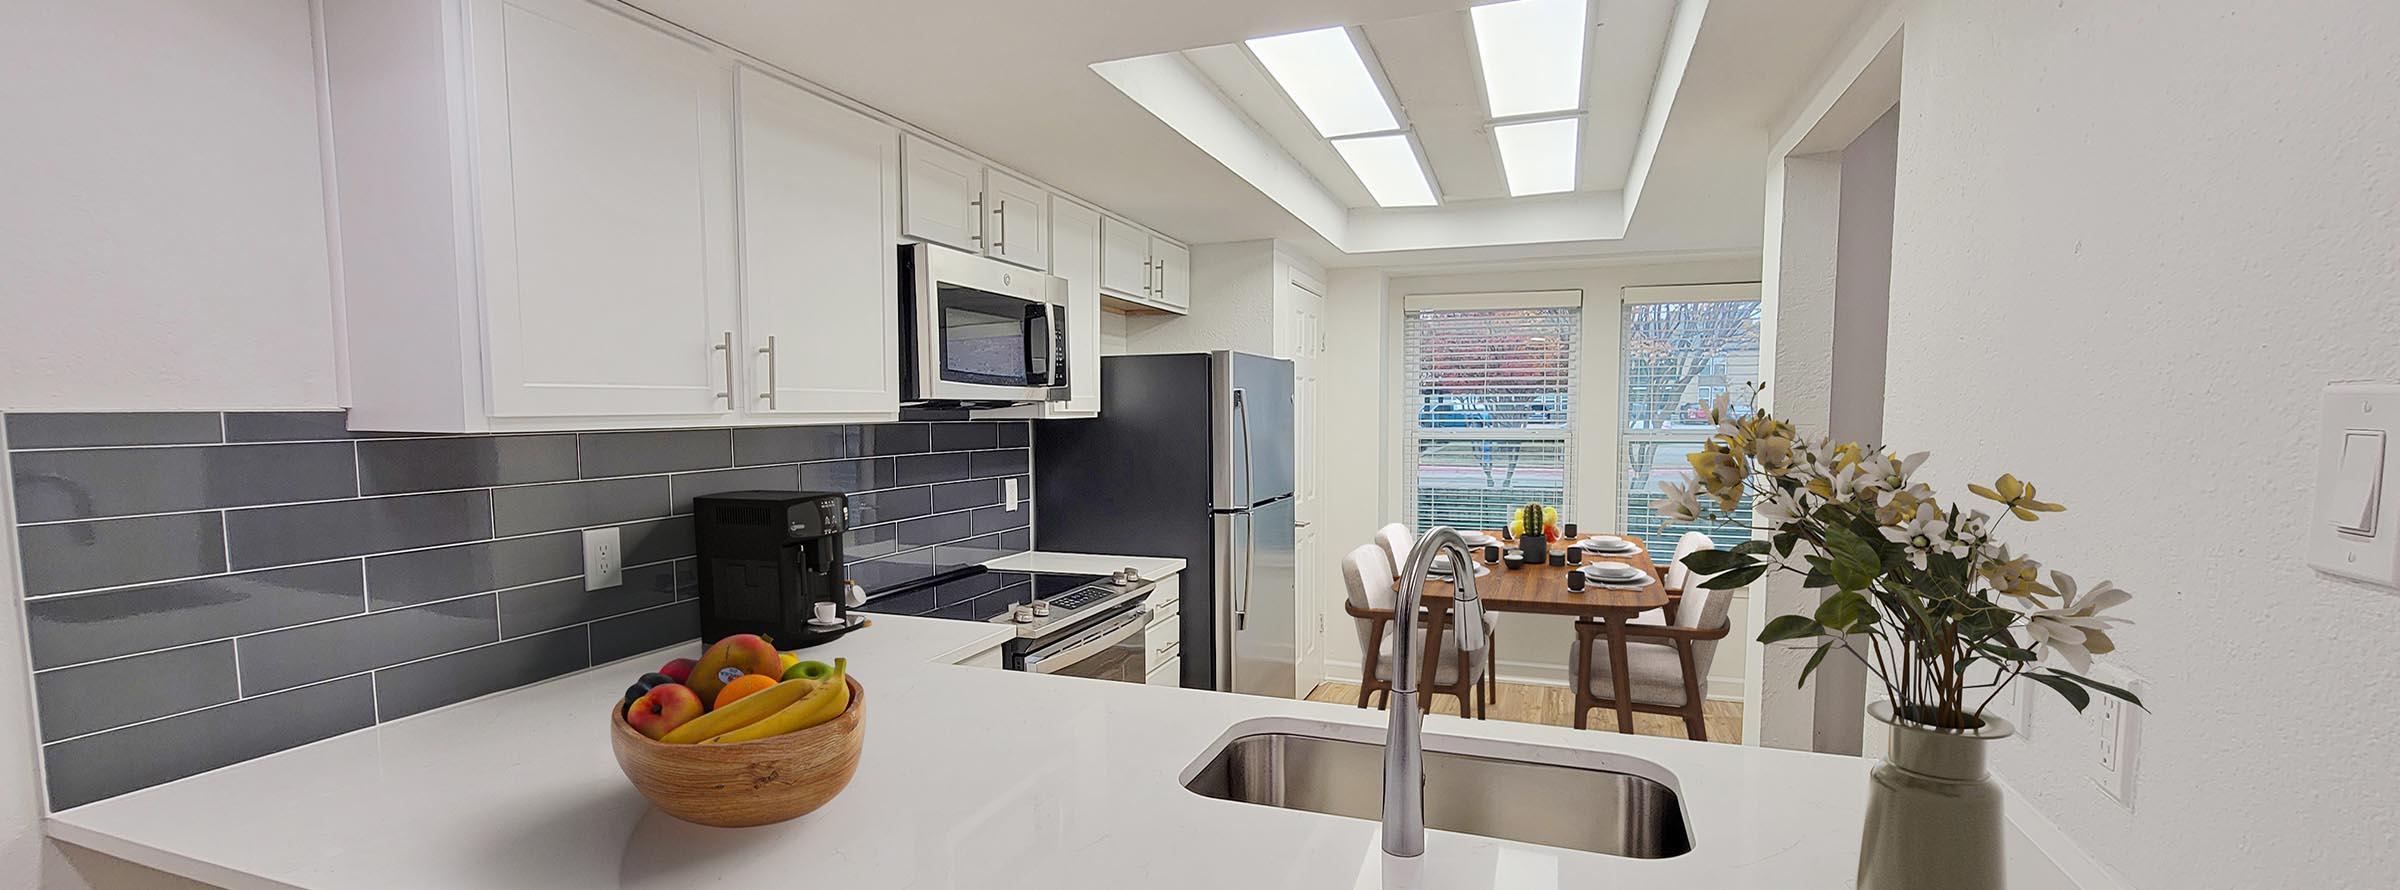 Kitchens with updated stainless steel appliances, brushed nickle fixtures, and new cabinetry.